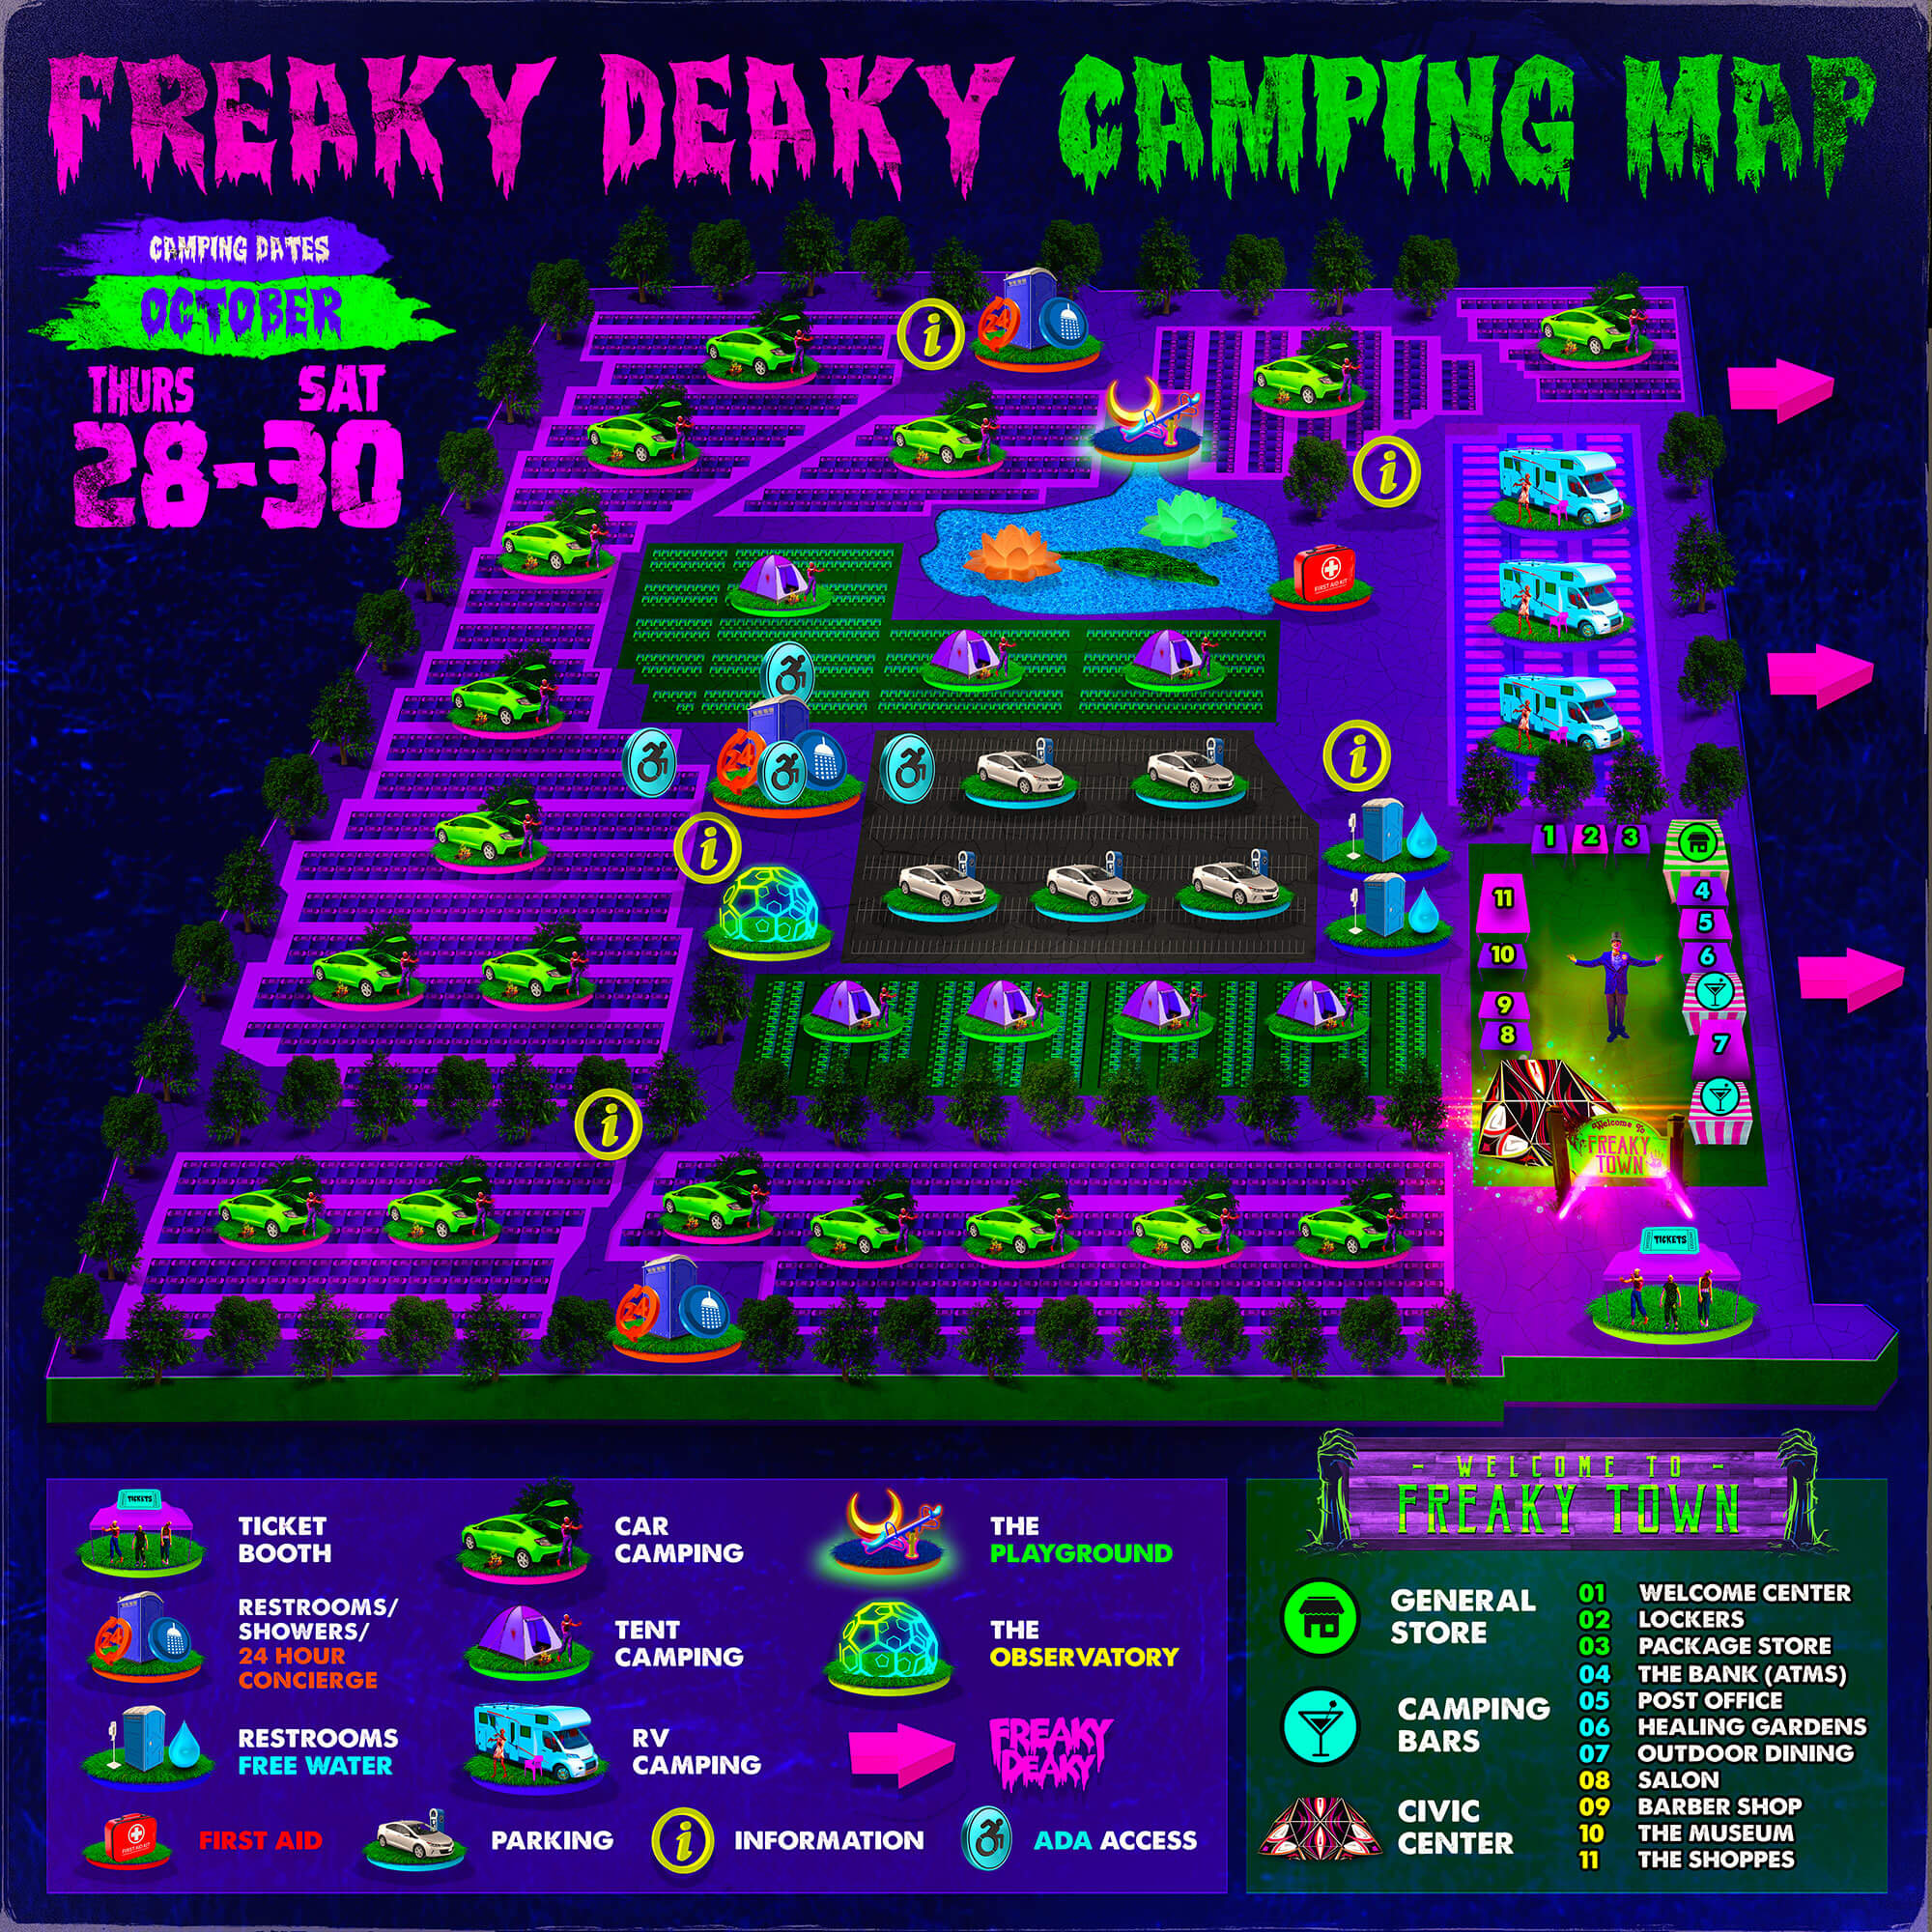 Freaky Deaky Releases Camping Map + Terrifying Trailer